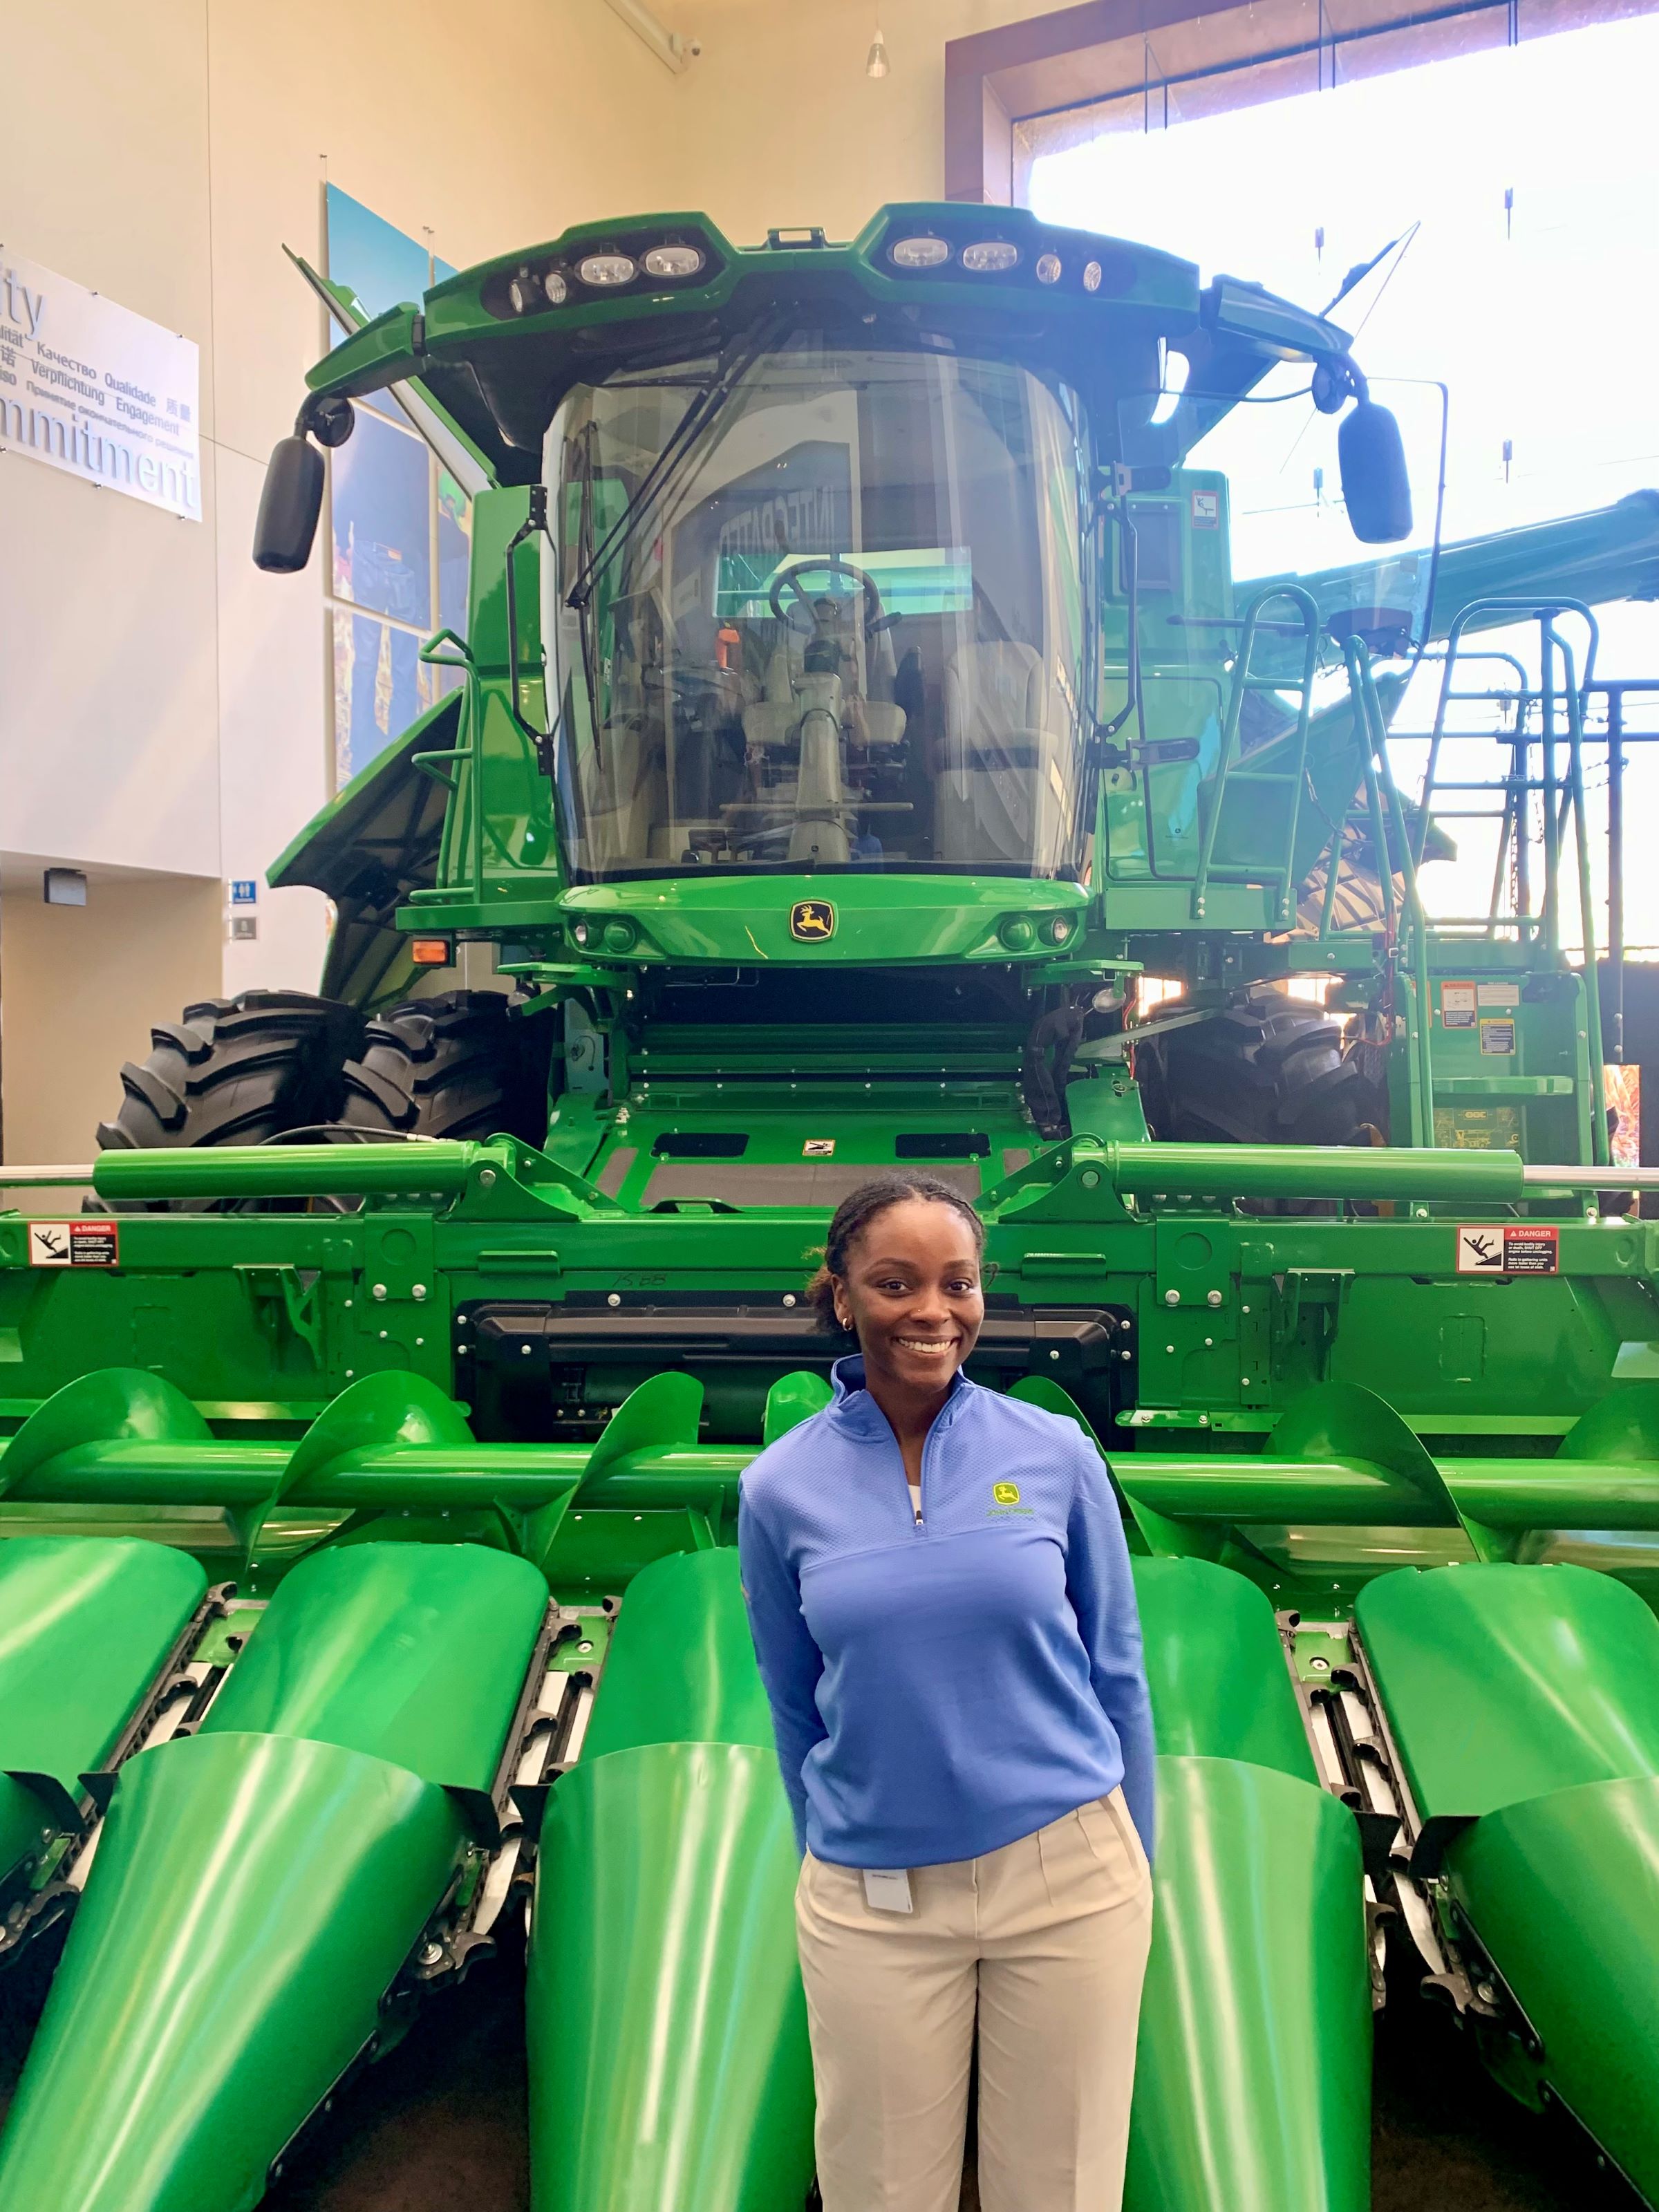 Caitlyn McFadden pictured standing in front of John Deere machinery. Photo provided by Caitlyn McFadden